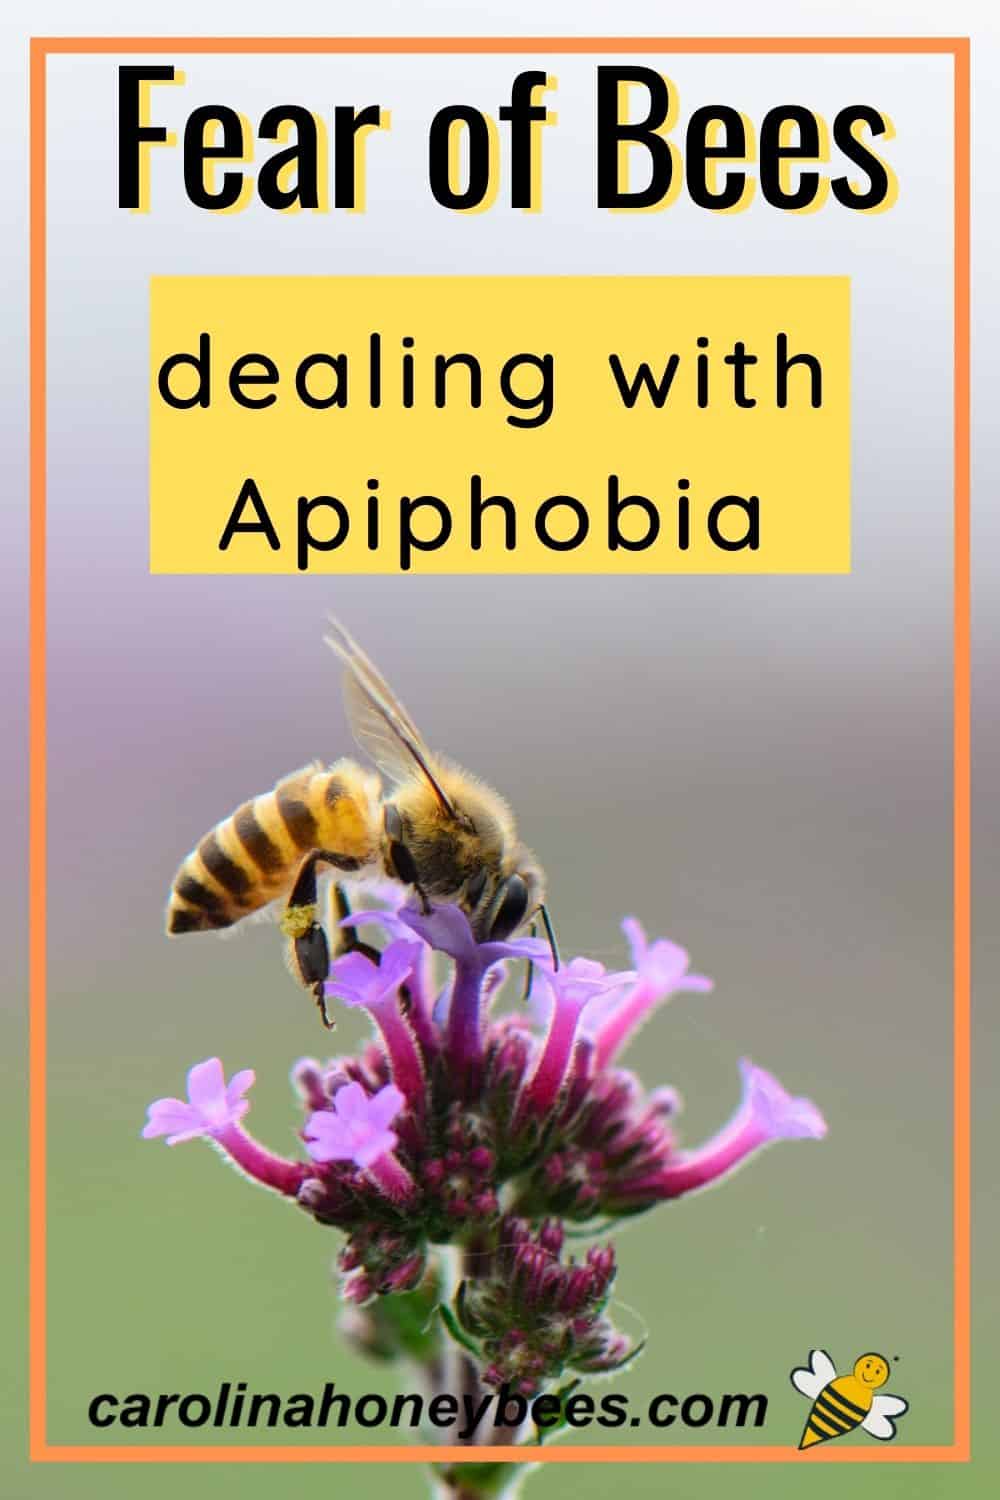 What is Apiphobia